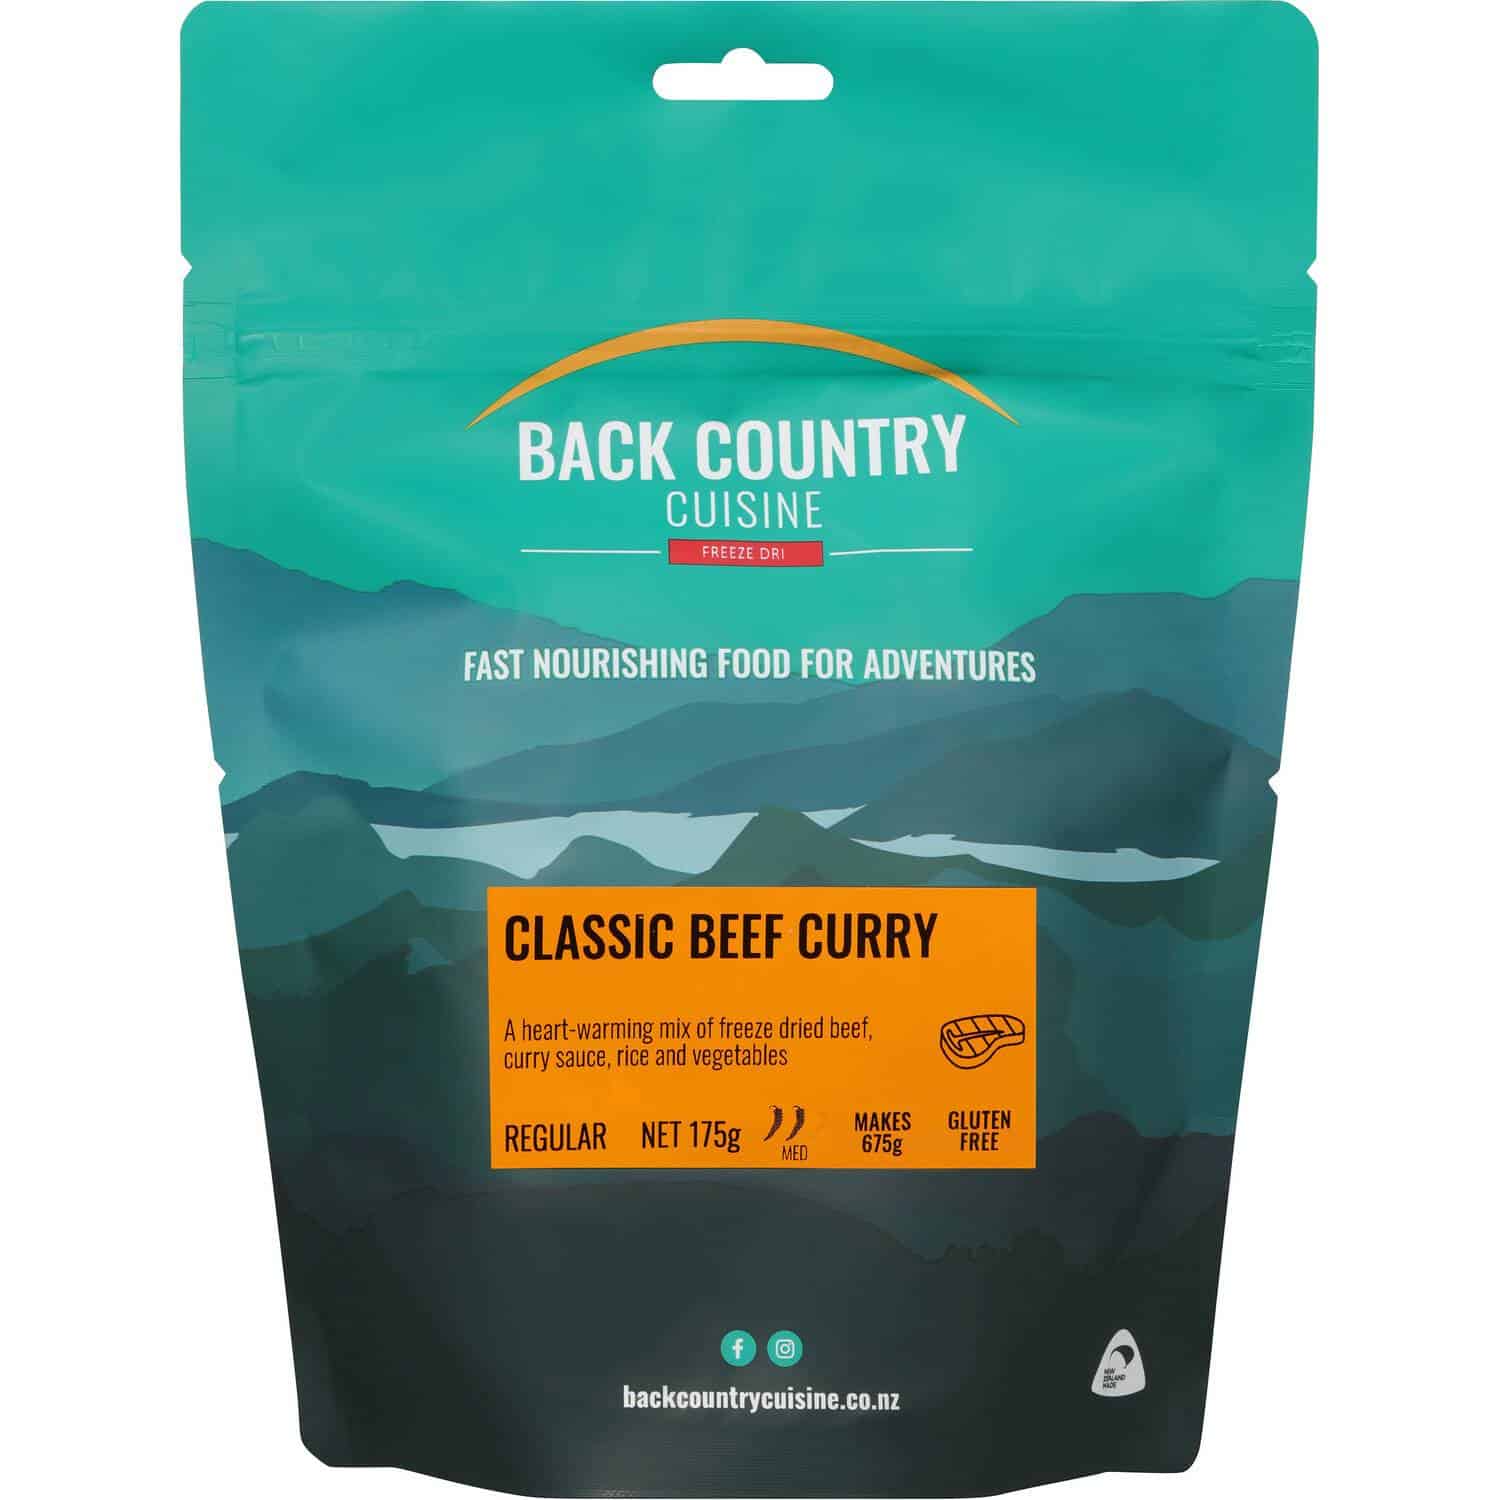 Back Country Cuisine Classic Beef Curry Regular - Tramping Food and Accessories sold by Venture Outdoors NZ